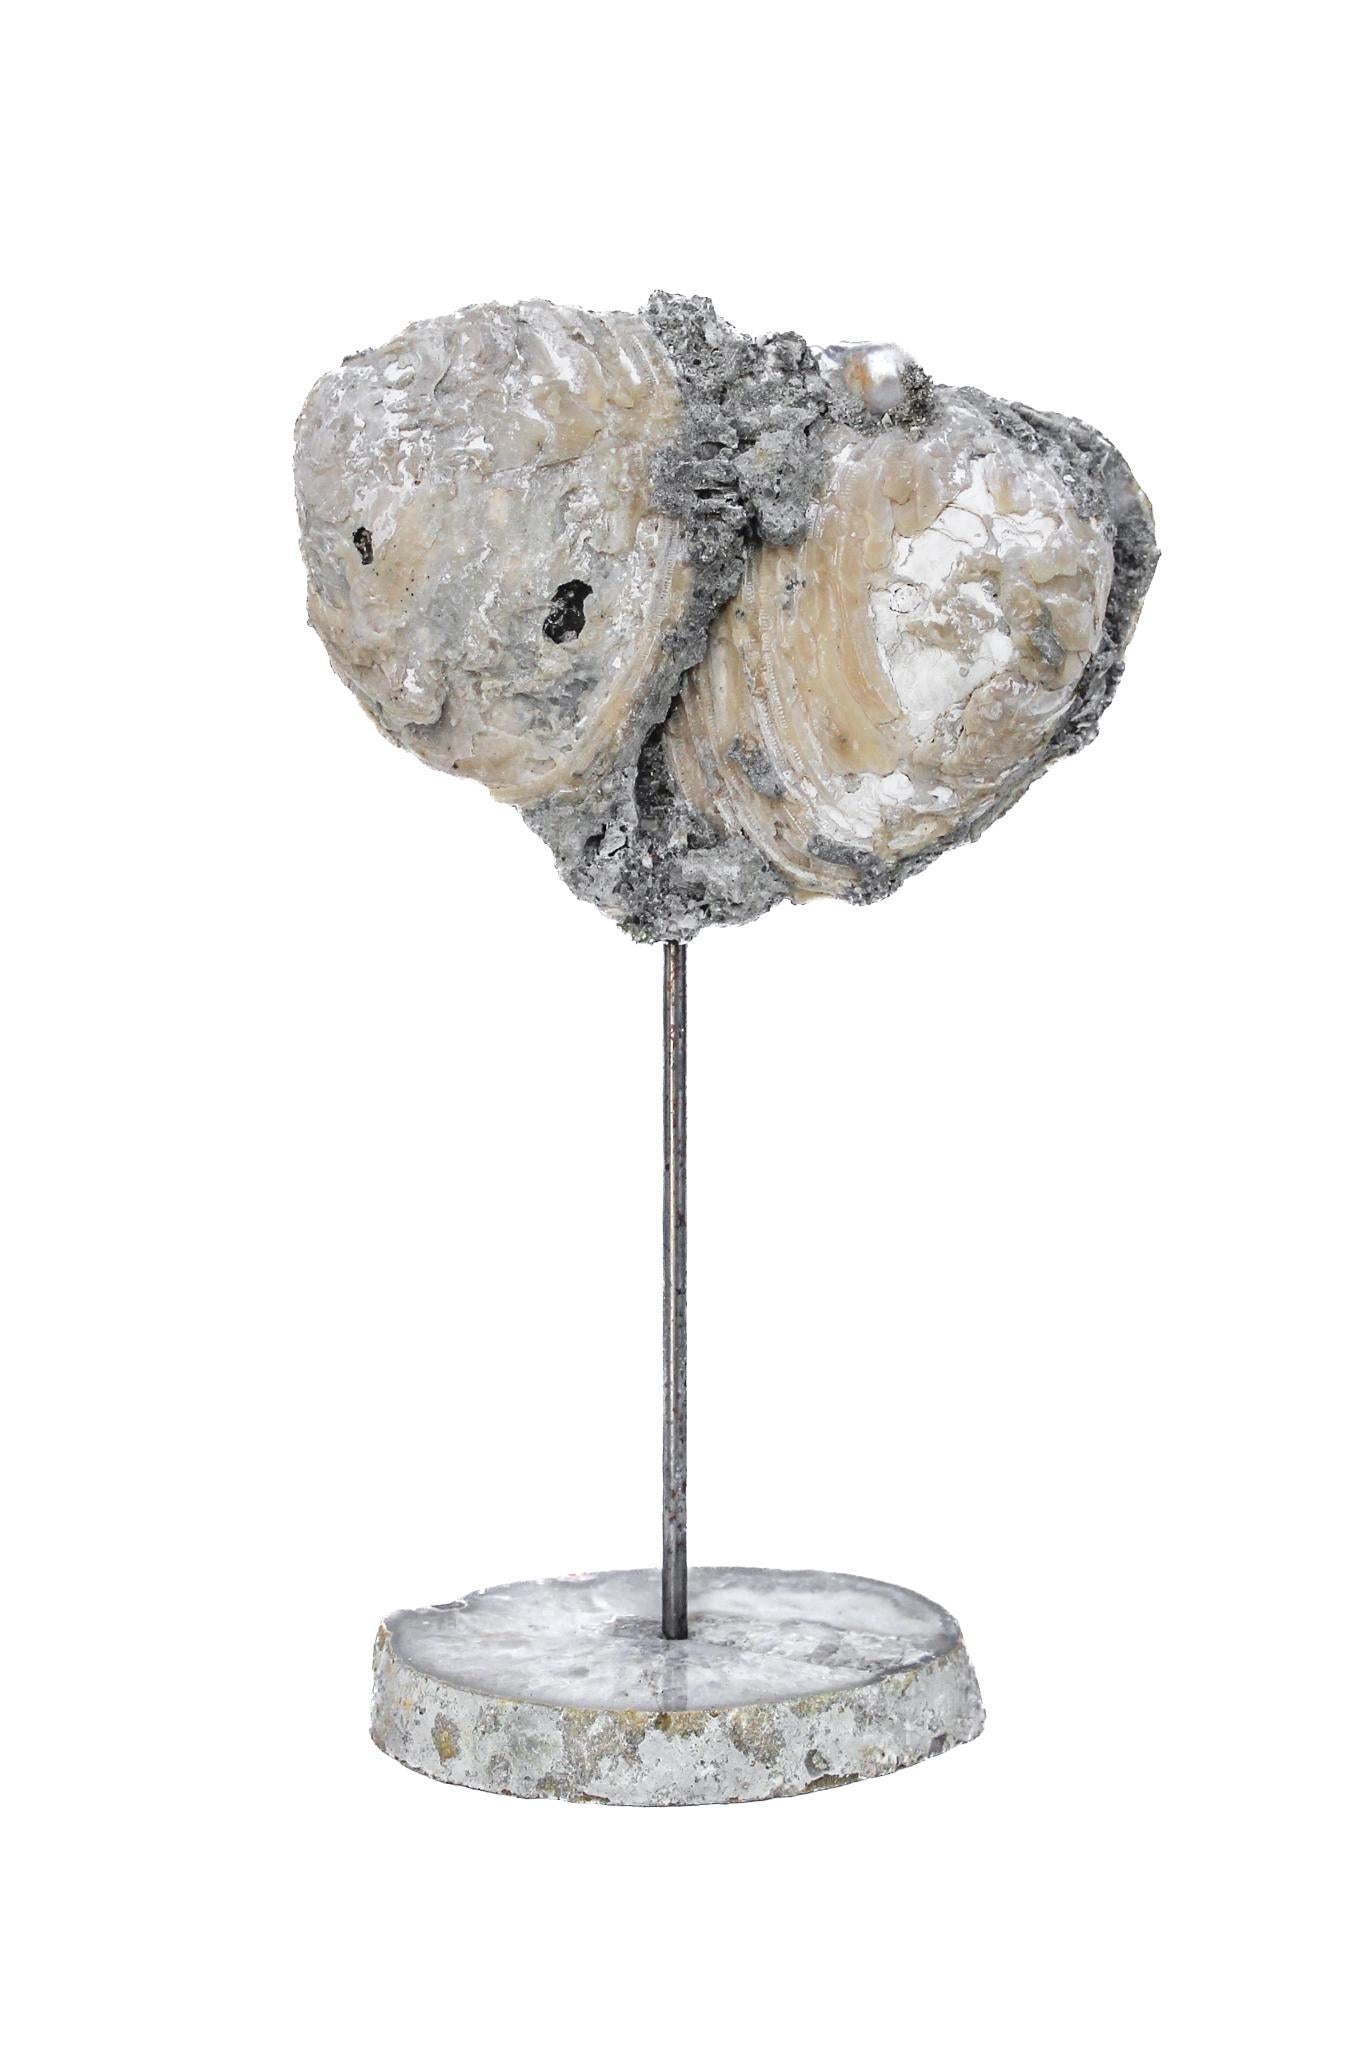 Contemporary Heart-Shaped Fossil Clamshell with Baroque Pearls on a Polished Agate Base